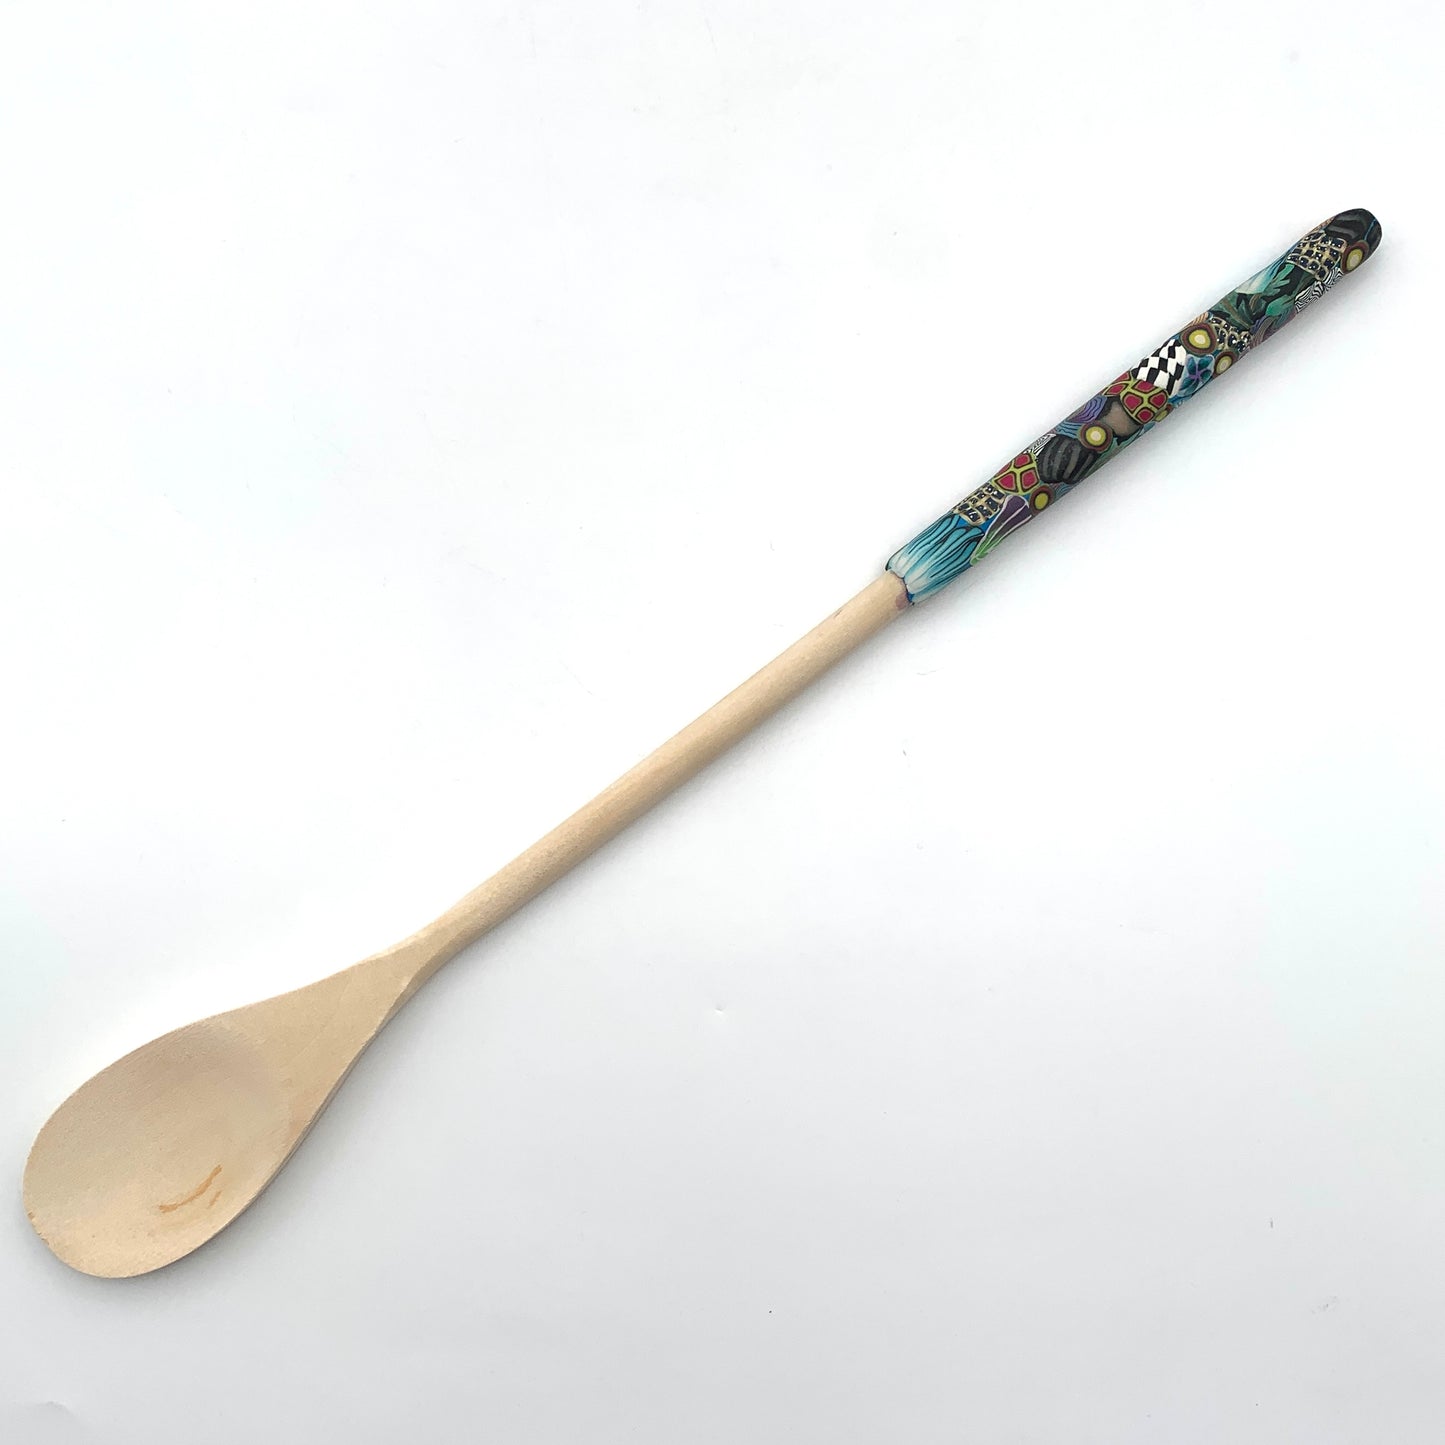 Polymer Clay on Wooden Spoon